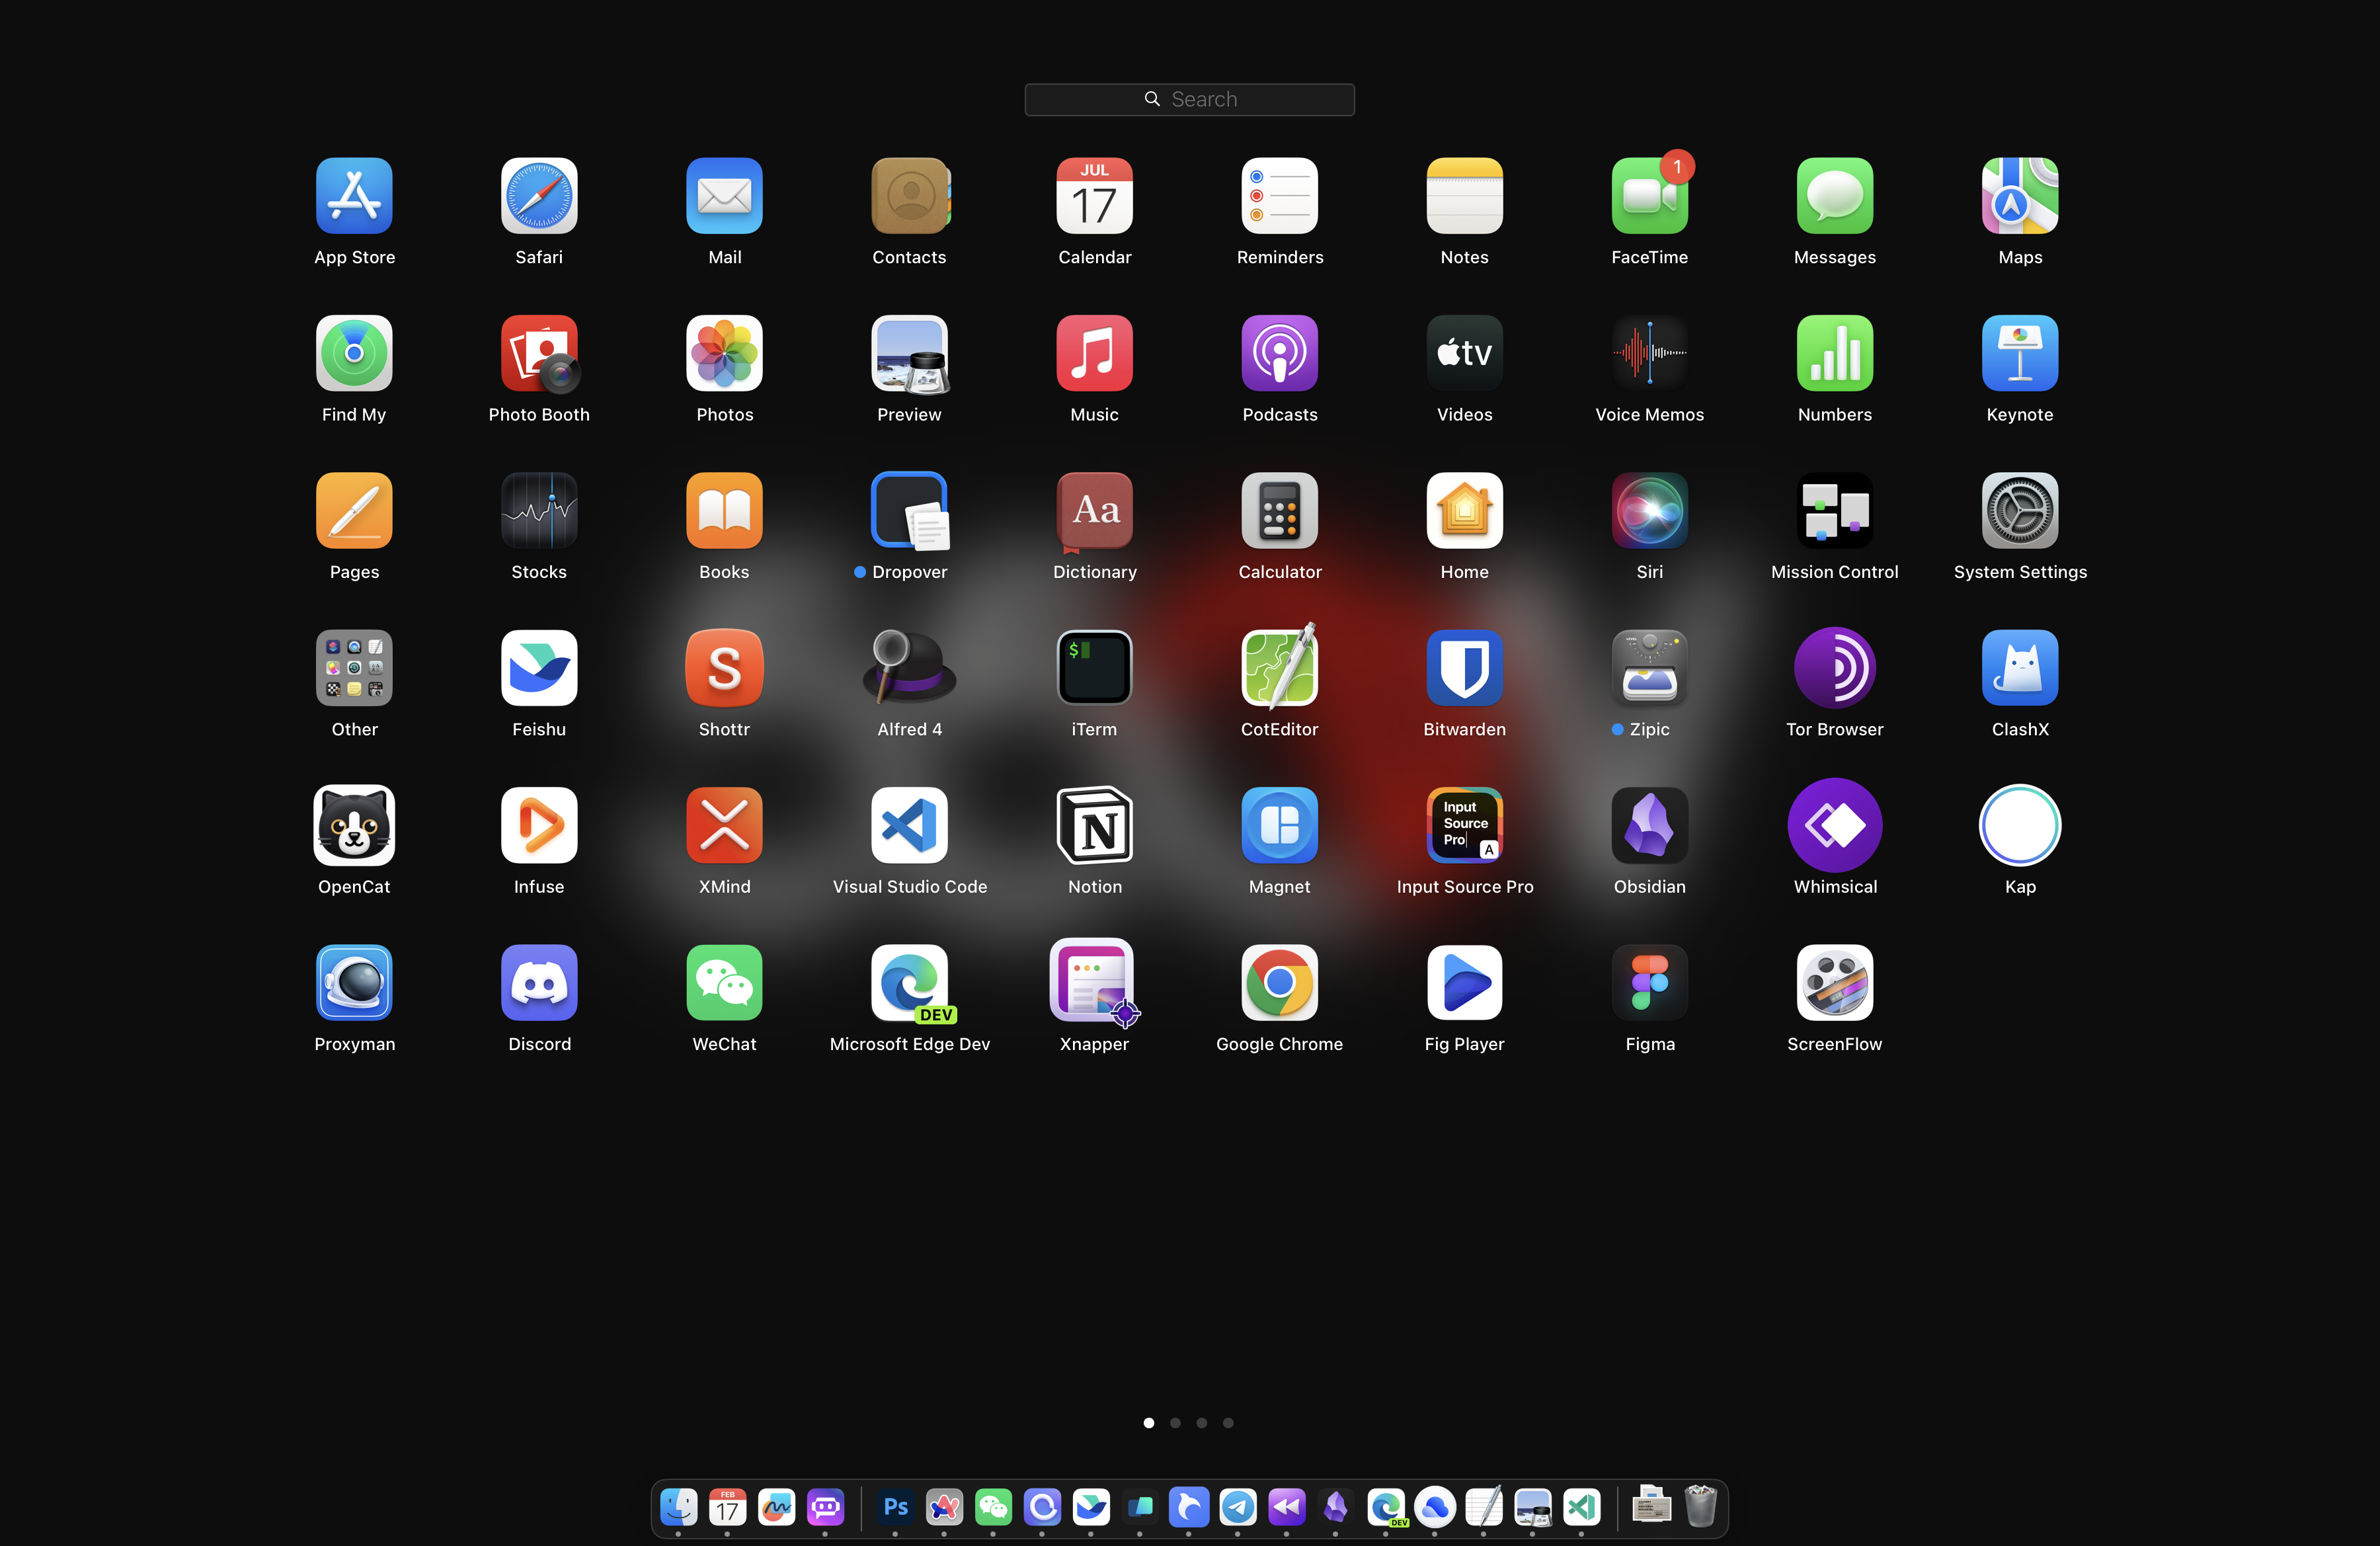 change launchpad icon grid layout to 10x8